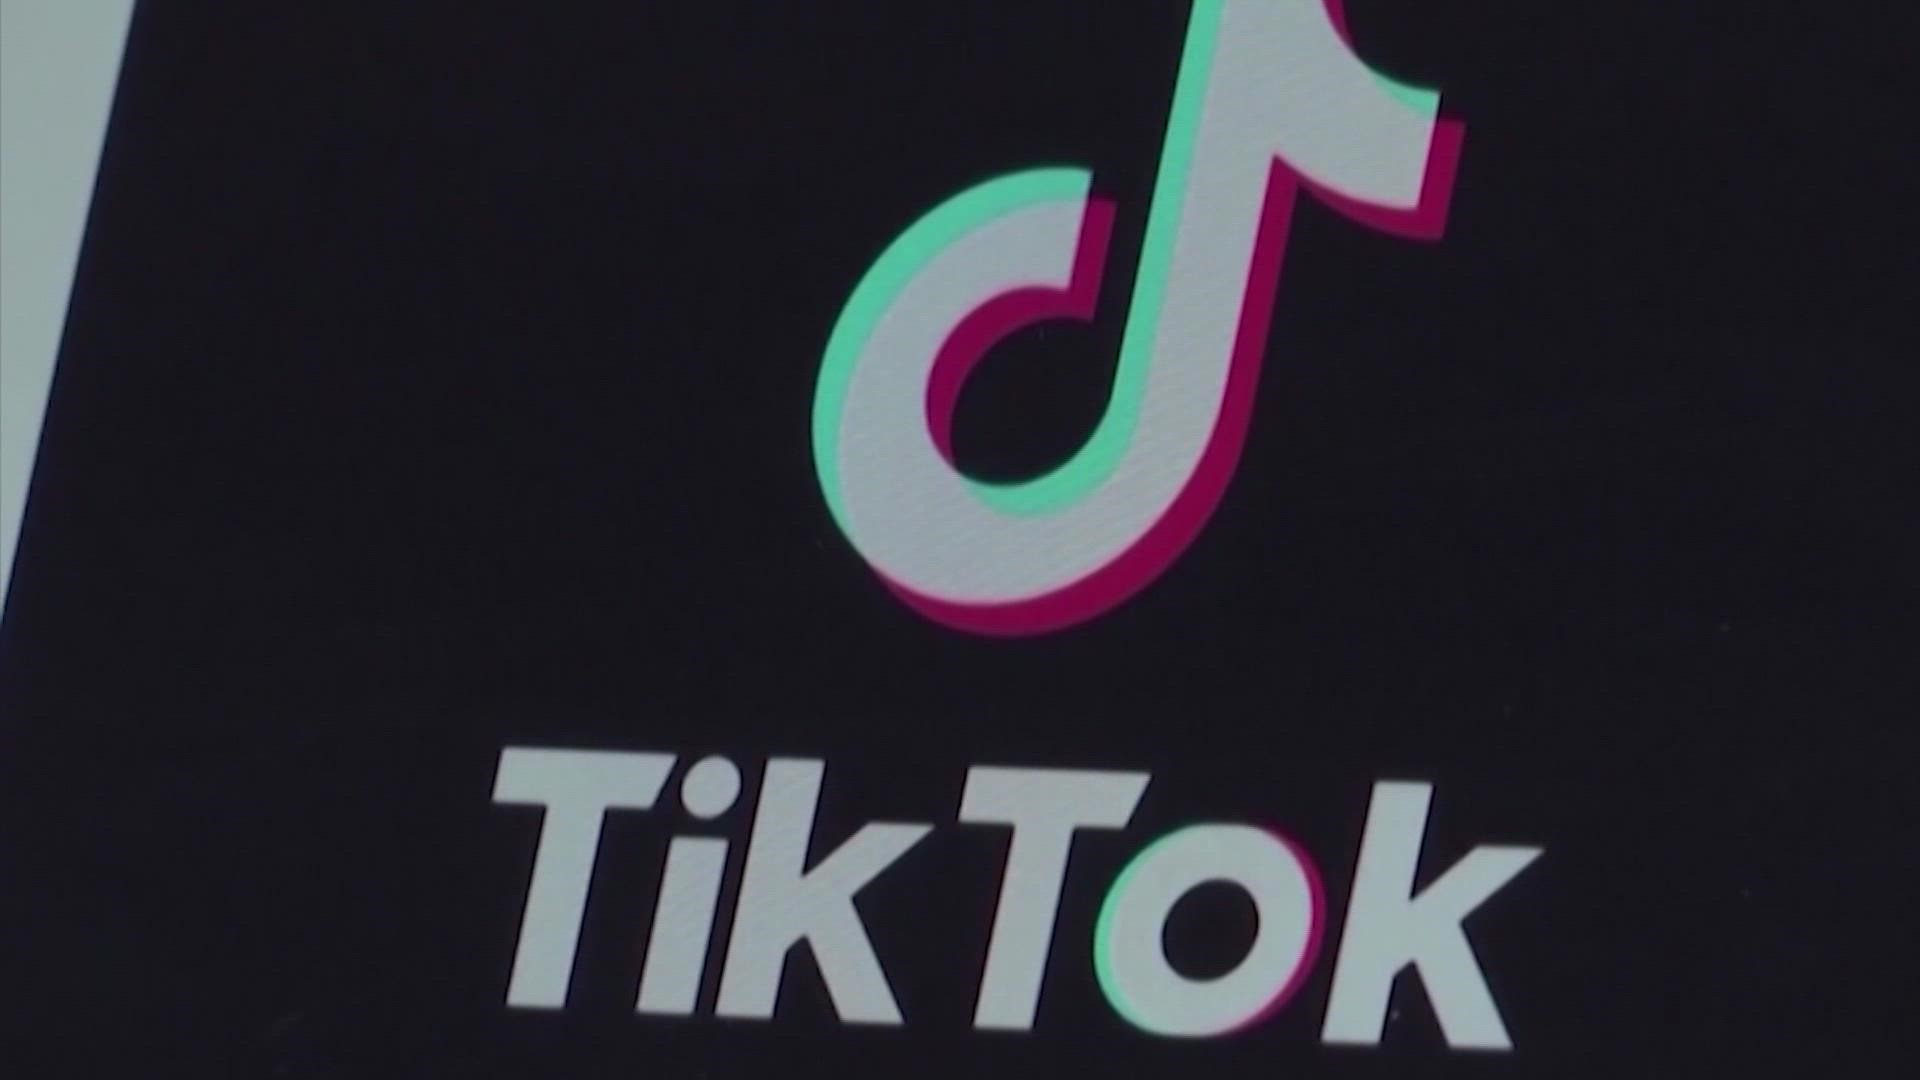 A threat that reportedly started on TikTok is being spread around the country warning that Friday, Dec. 17, is "American School Shooting Day."